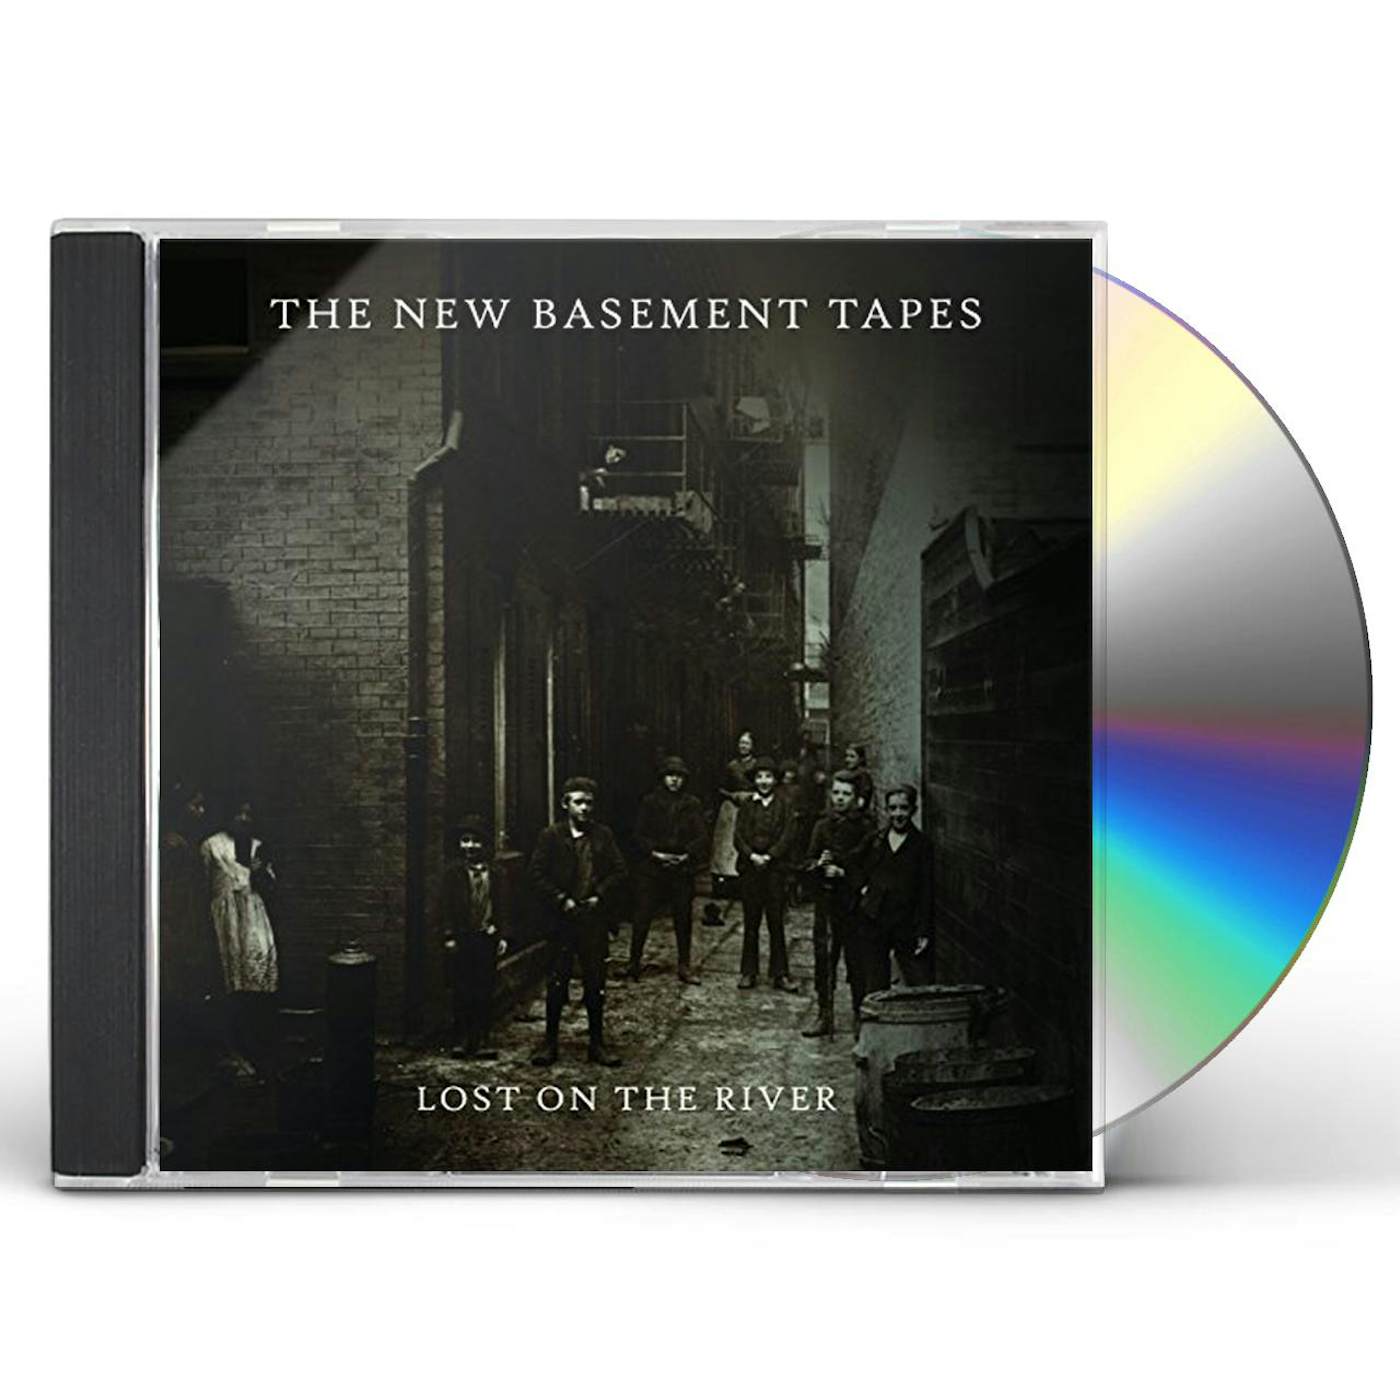 The New Basement Tapes LOST ON THE RIVER CD